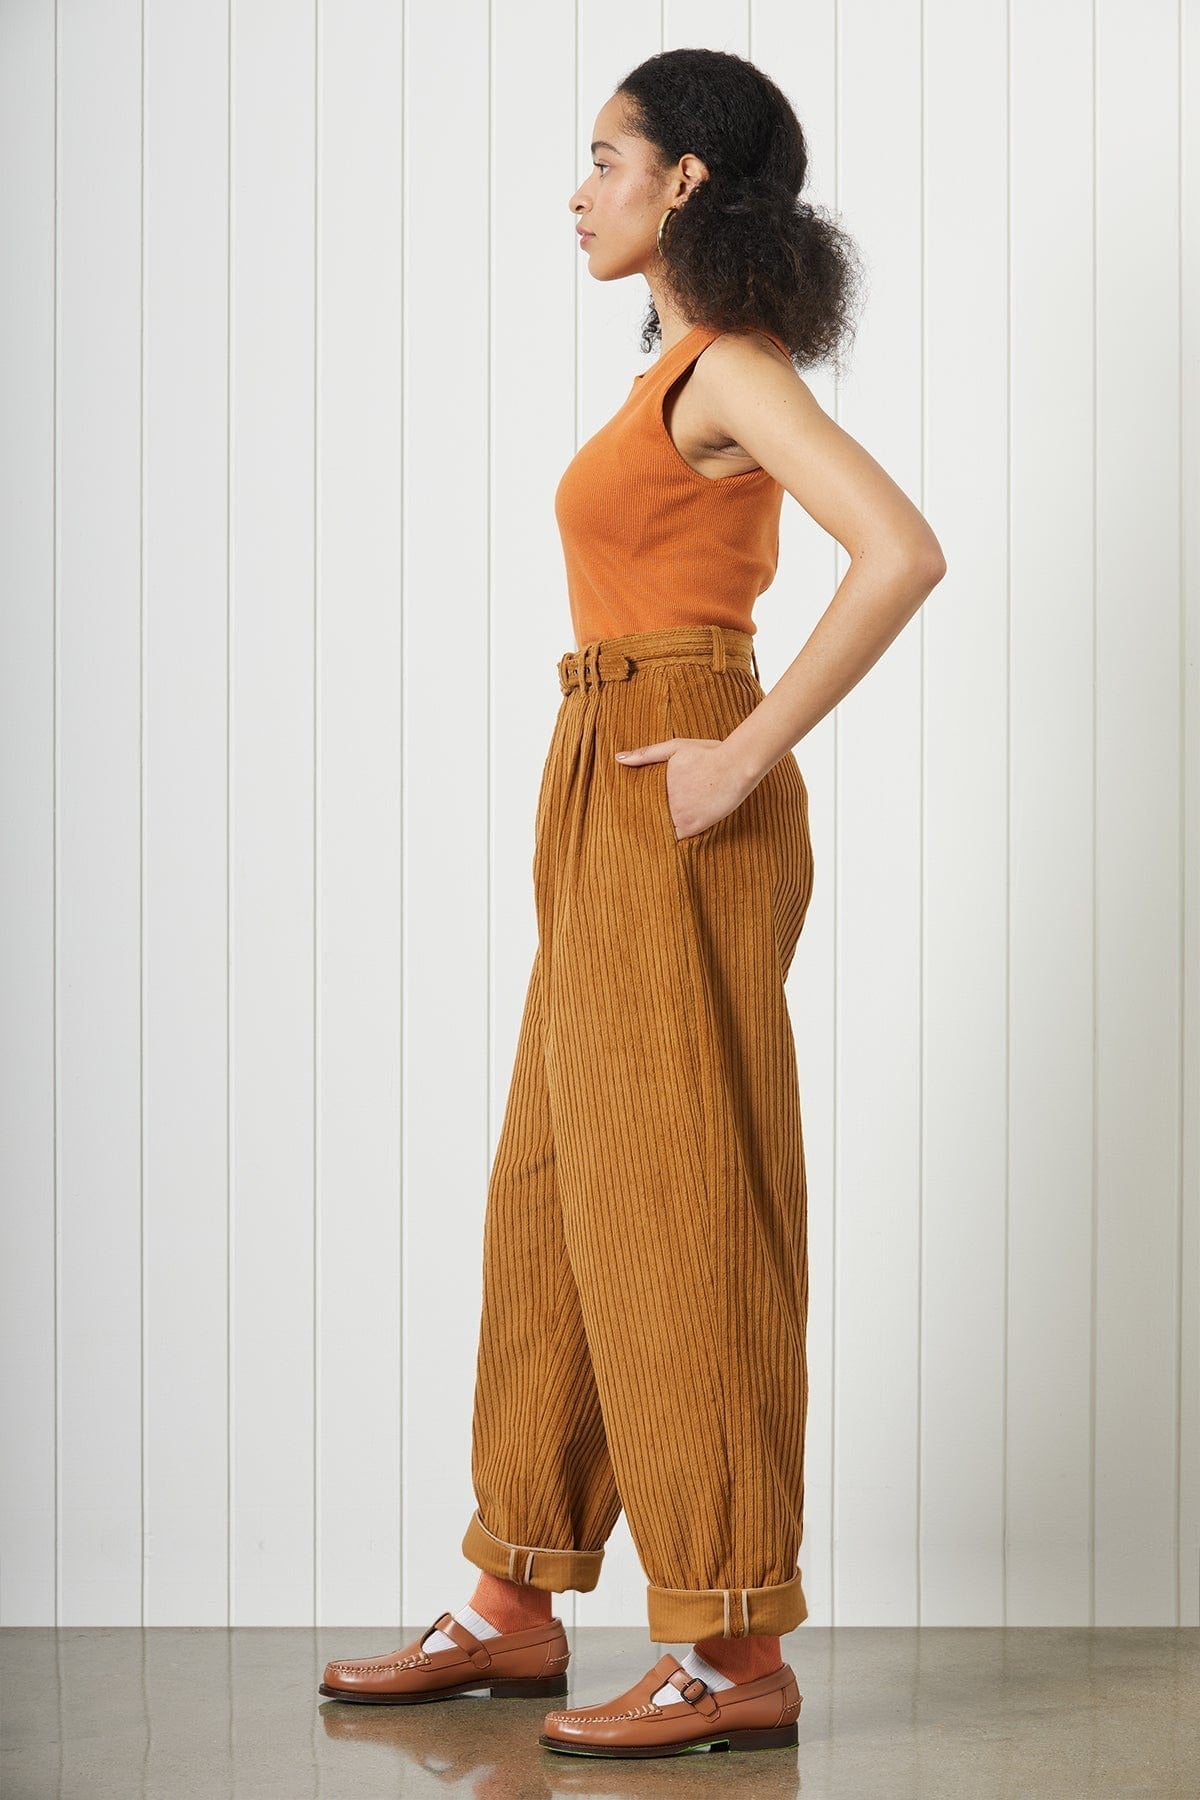 Marceaux Pant in Wide Corduroy Pants CHRISTINE ALCALAY   